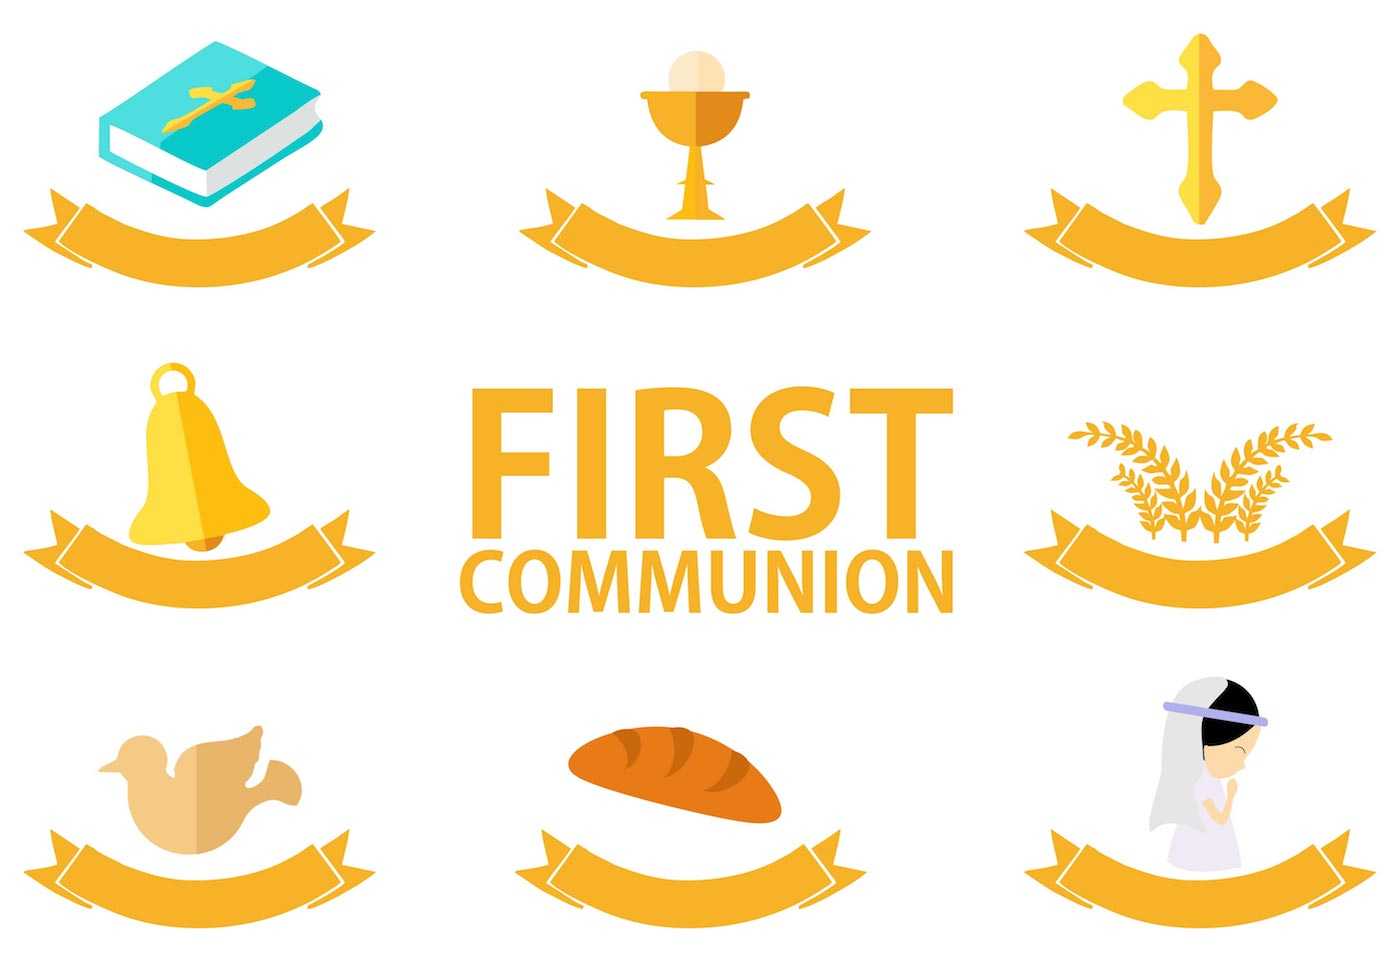 First Communion Template Free Vector Art – (25 Free Downloads) Regarding Free Printable First Communion Banner Templates